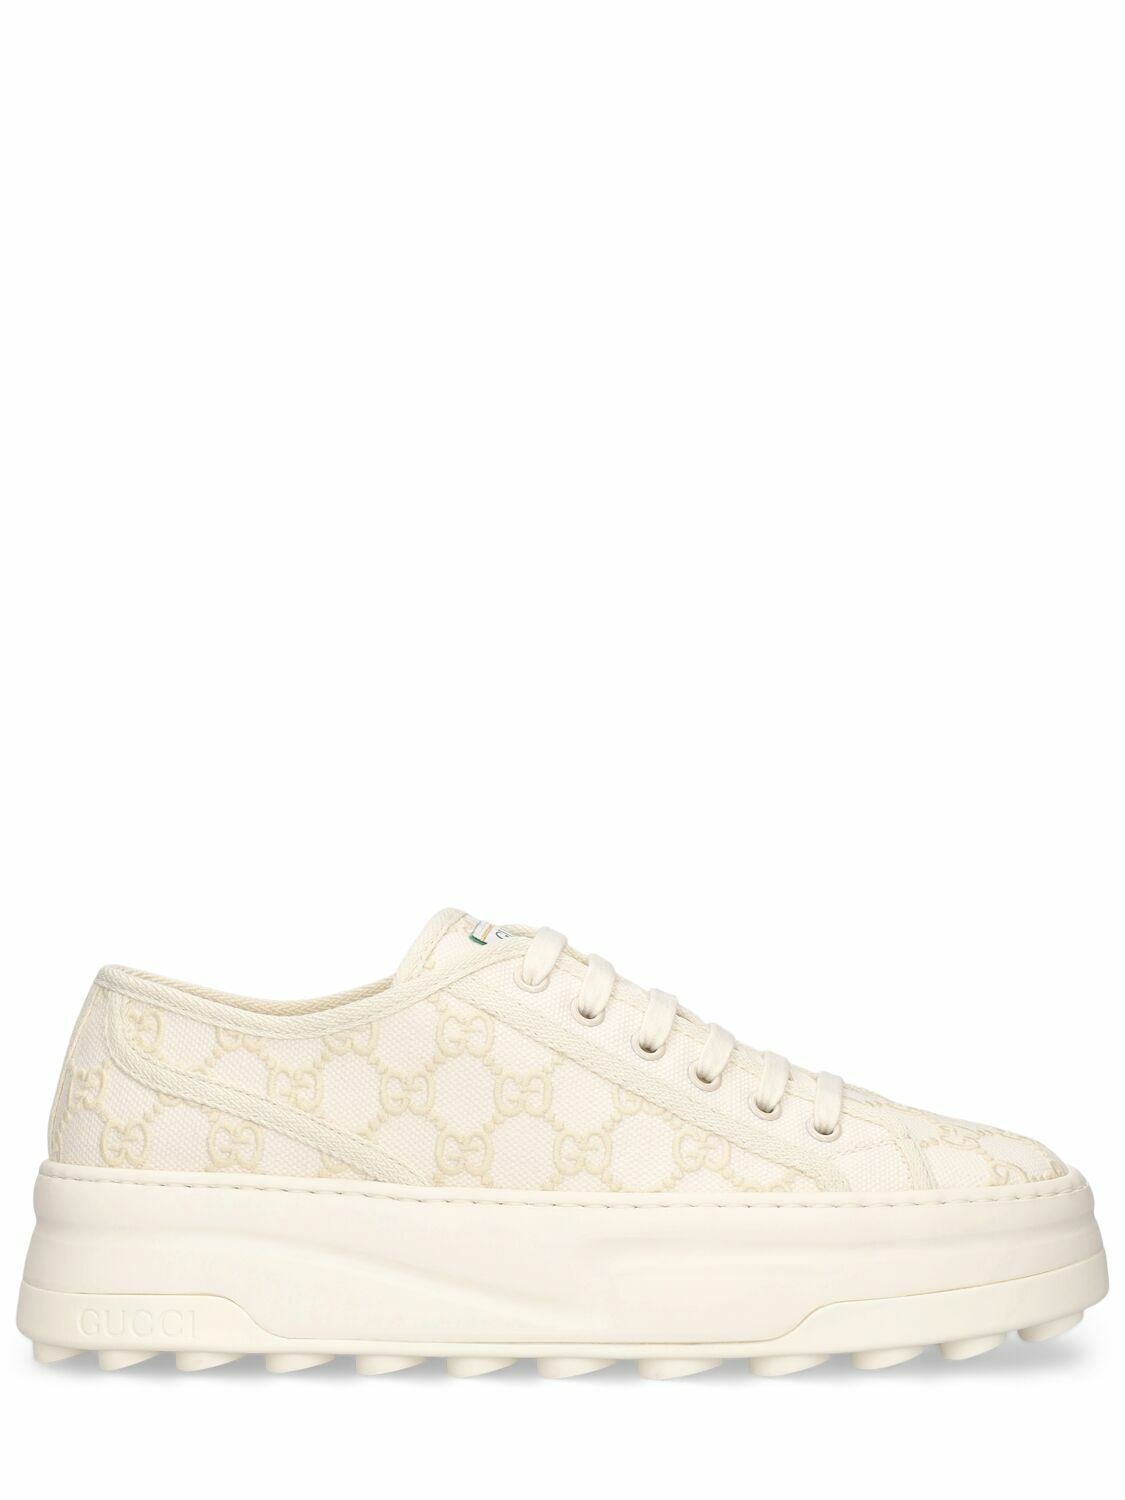 Photo: GUCCI 52mm Gucci Tennis 1977 Sneakers